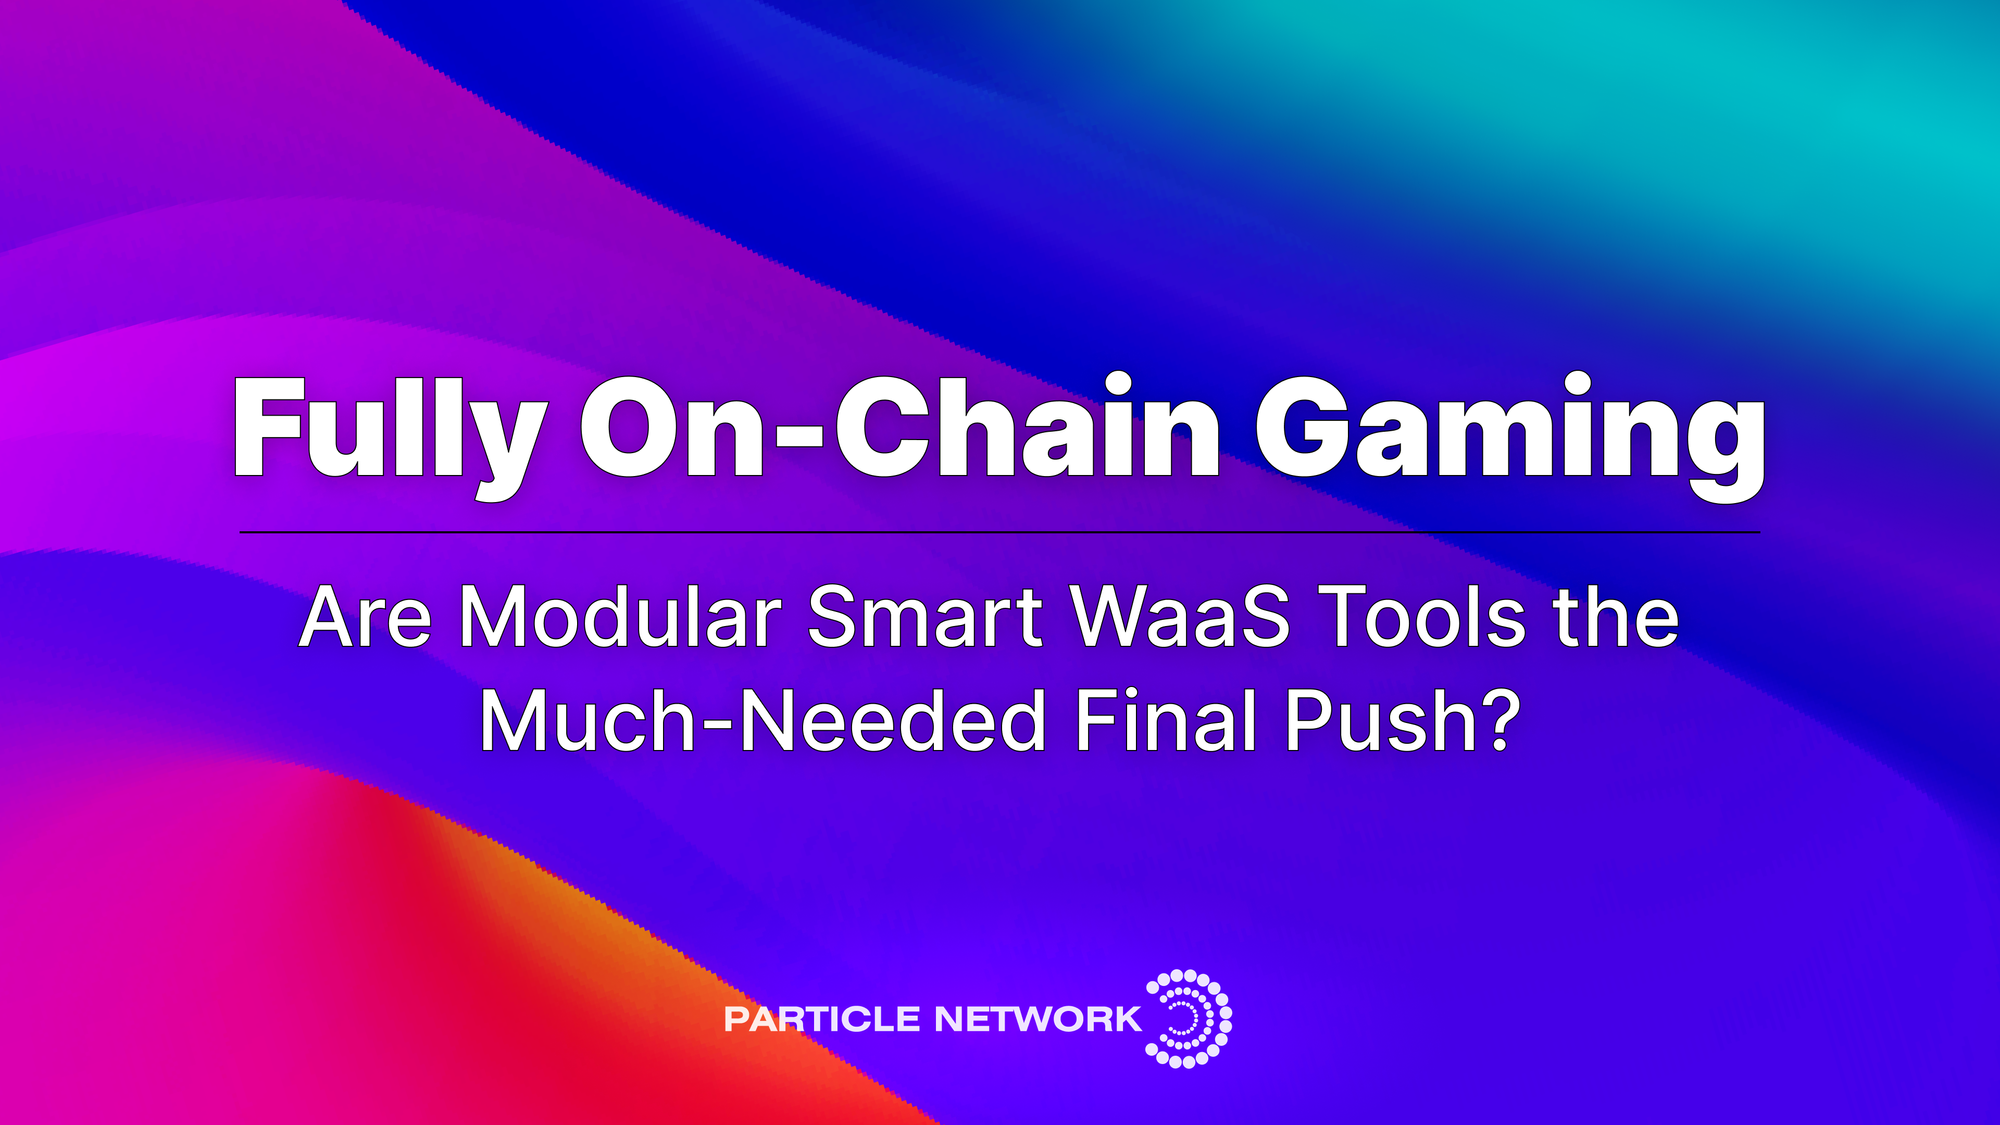 Fully On-Chain Gaming: Can Smart Wallet-as-a-Service tools be a much-needed "final push"?